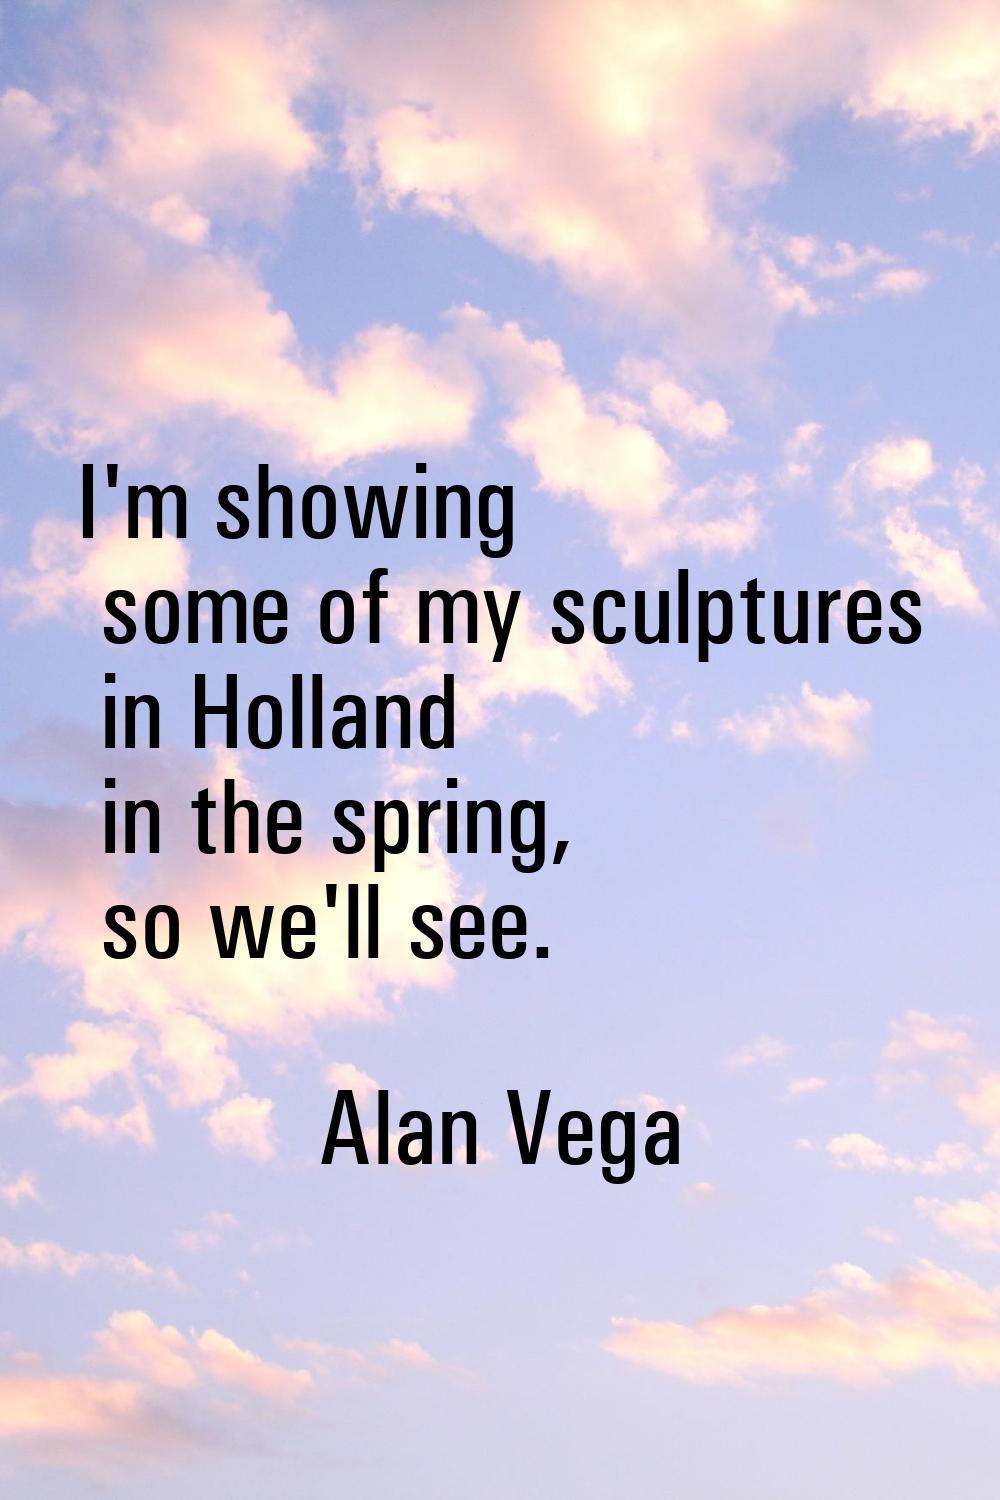 I'm showing some of my sculptures in Holland in the spring, so we'll see.